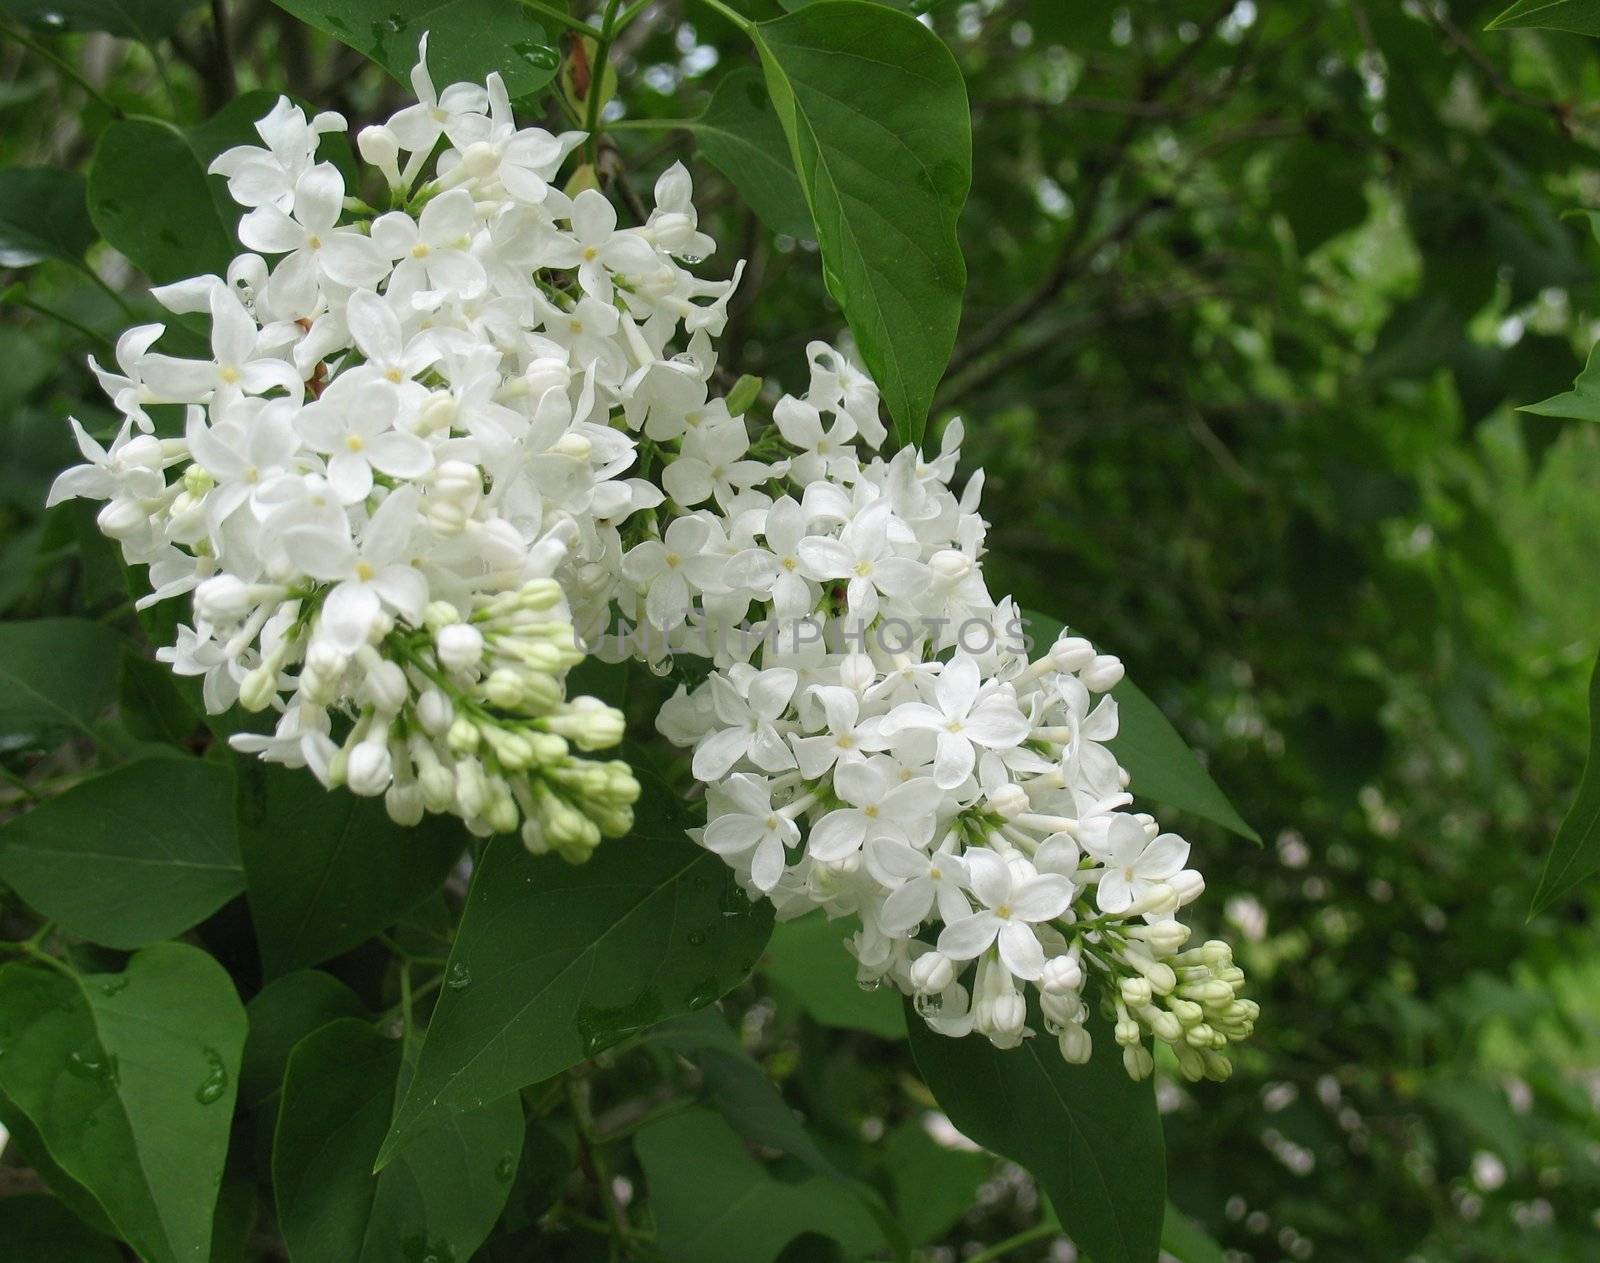 This is an image of large clusters of extremely fragrant, double white flowers open from creamy yellow buds. Medium green foliage exhibits good disease-resistance. Ideal flowering hedge or specimen